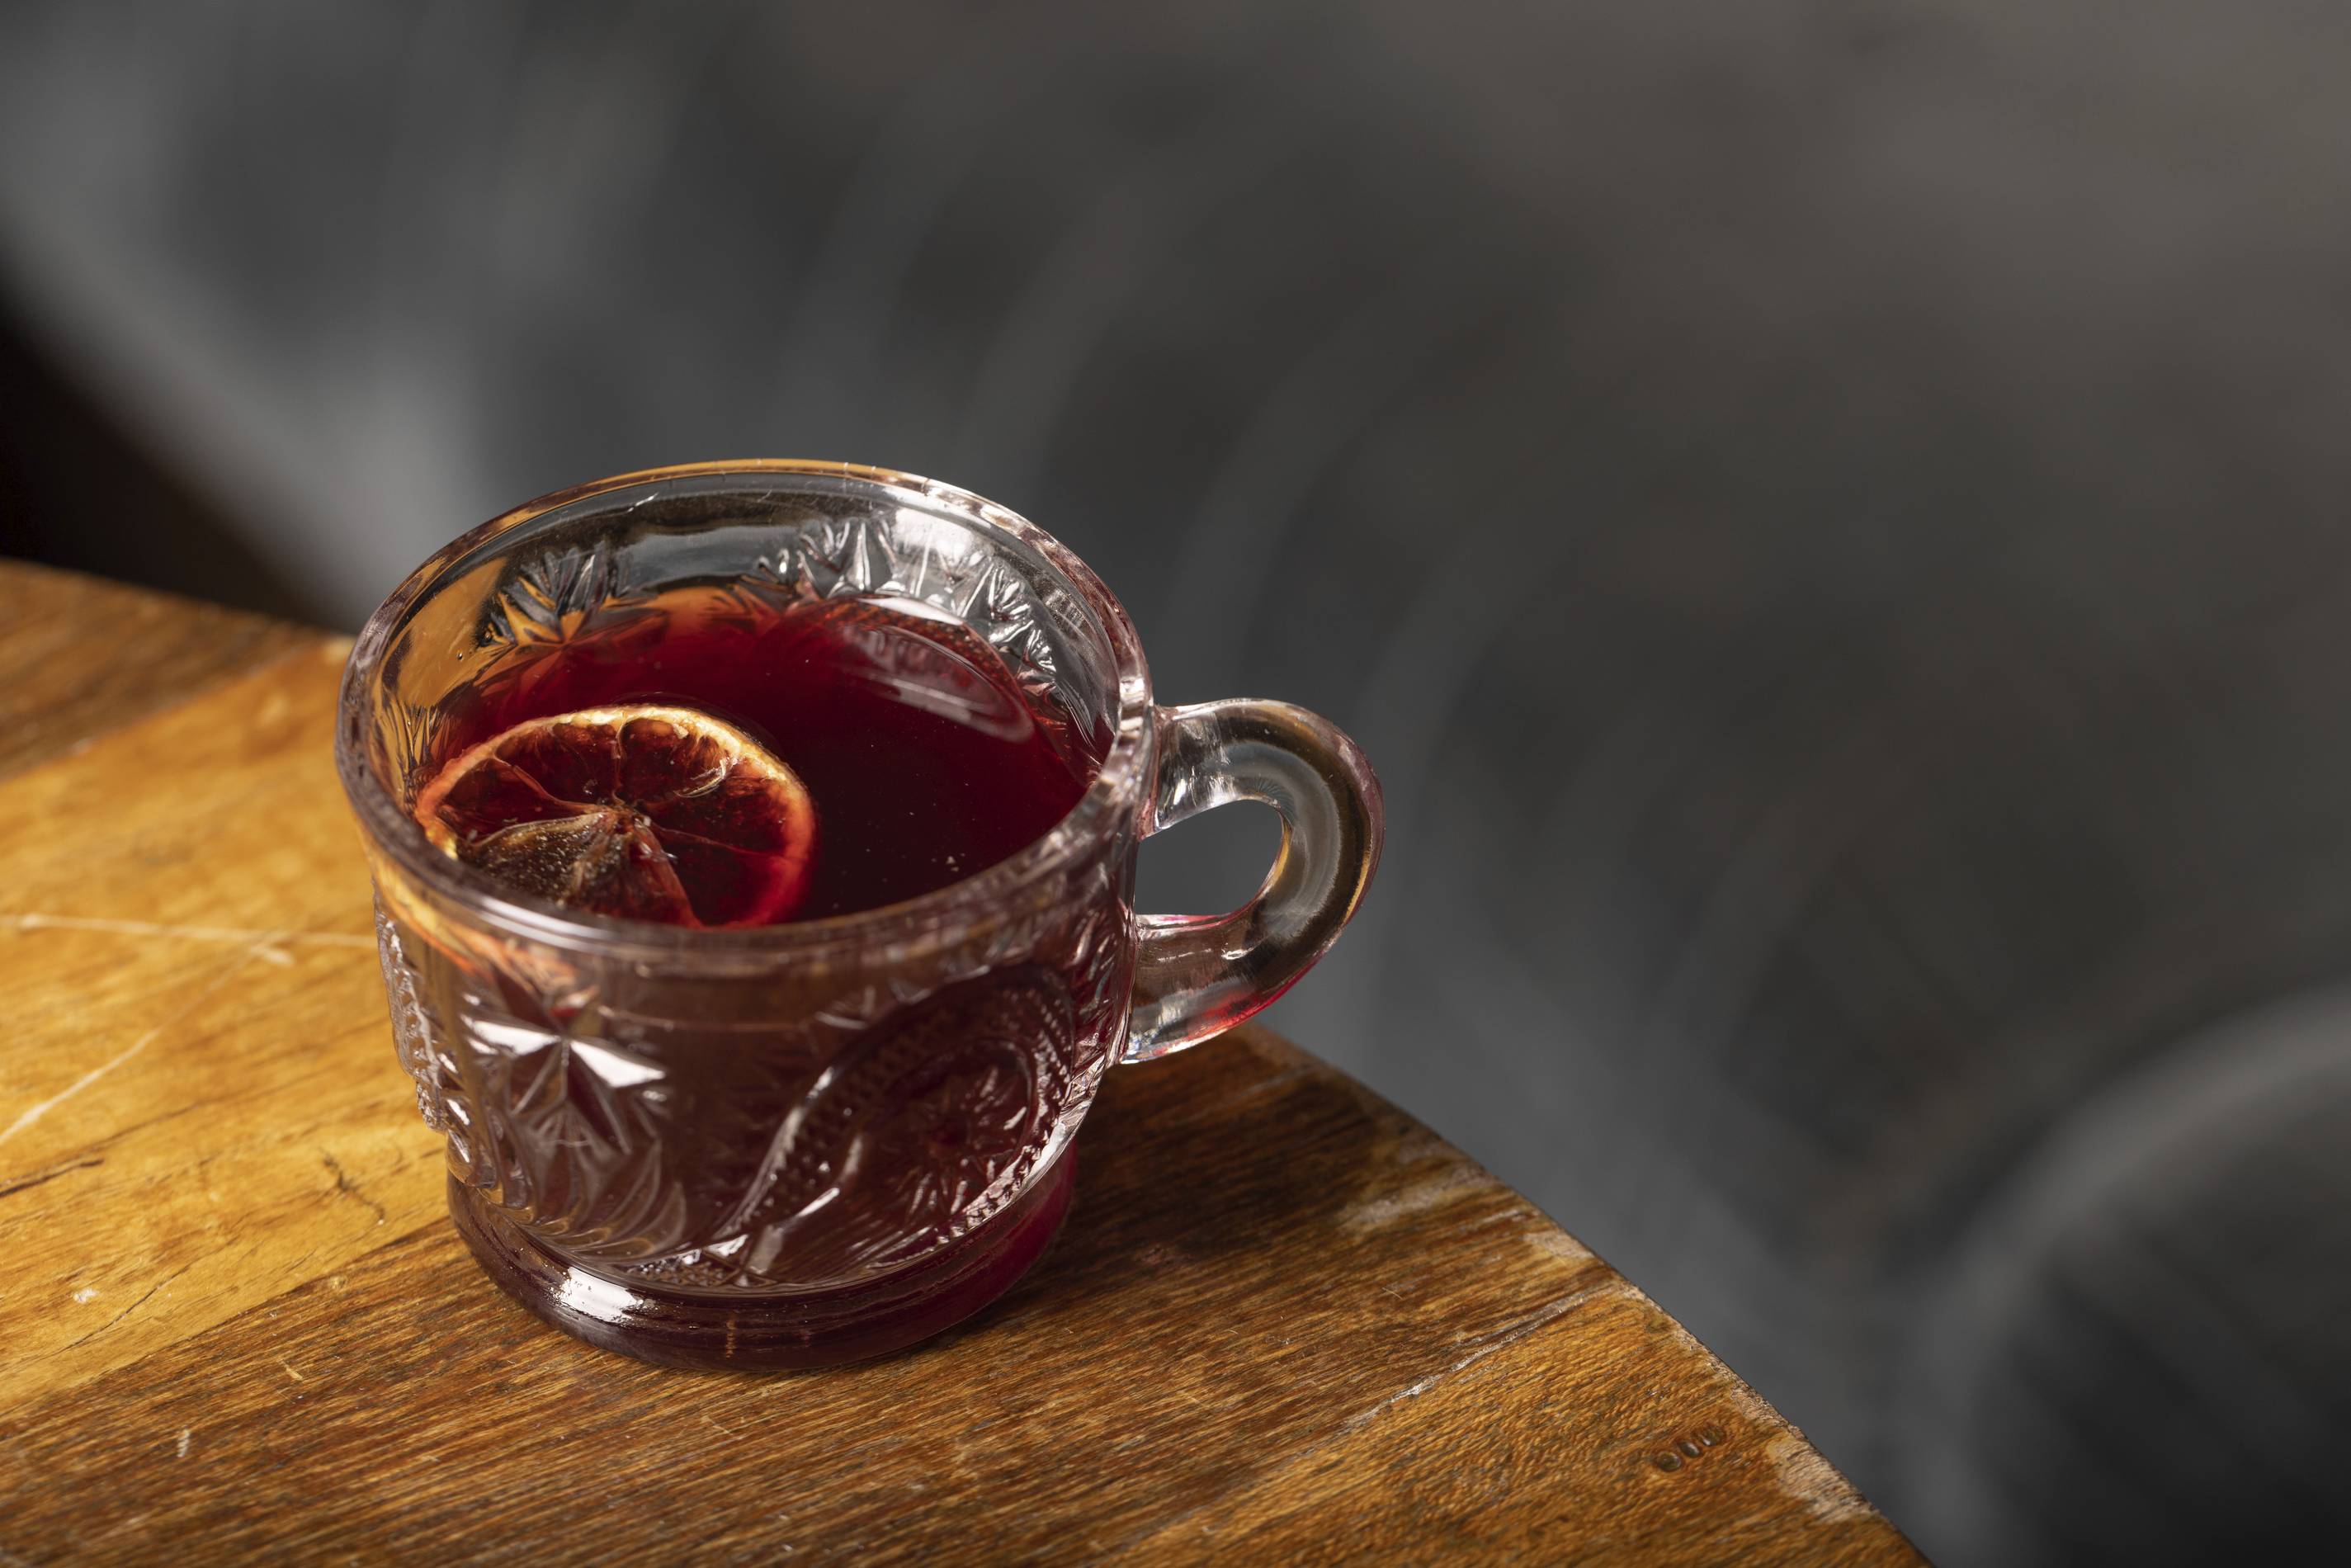 cardamom mulled wine by chambord